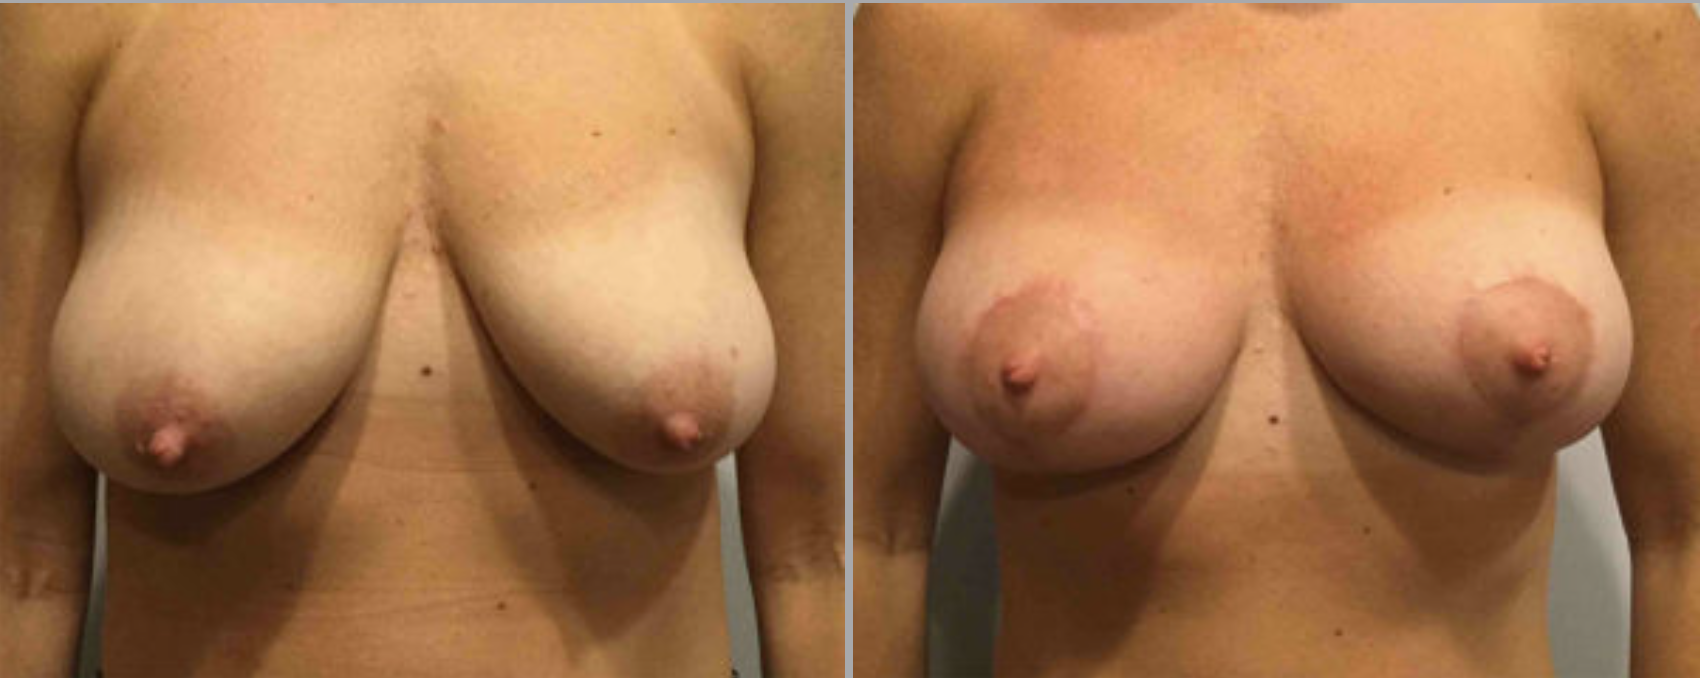 Breast Lift Before and After Pictures in Bucks County, PA and Hunterdon County, NJ